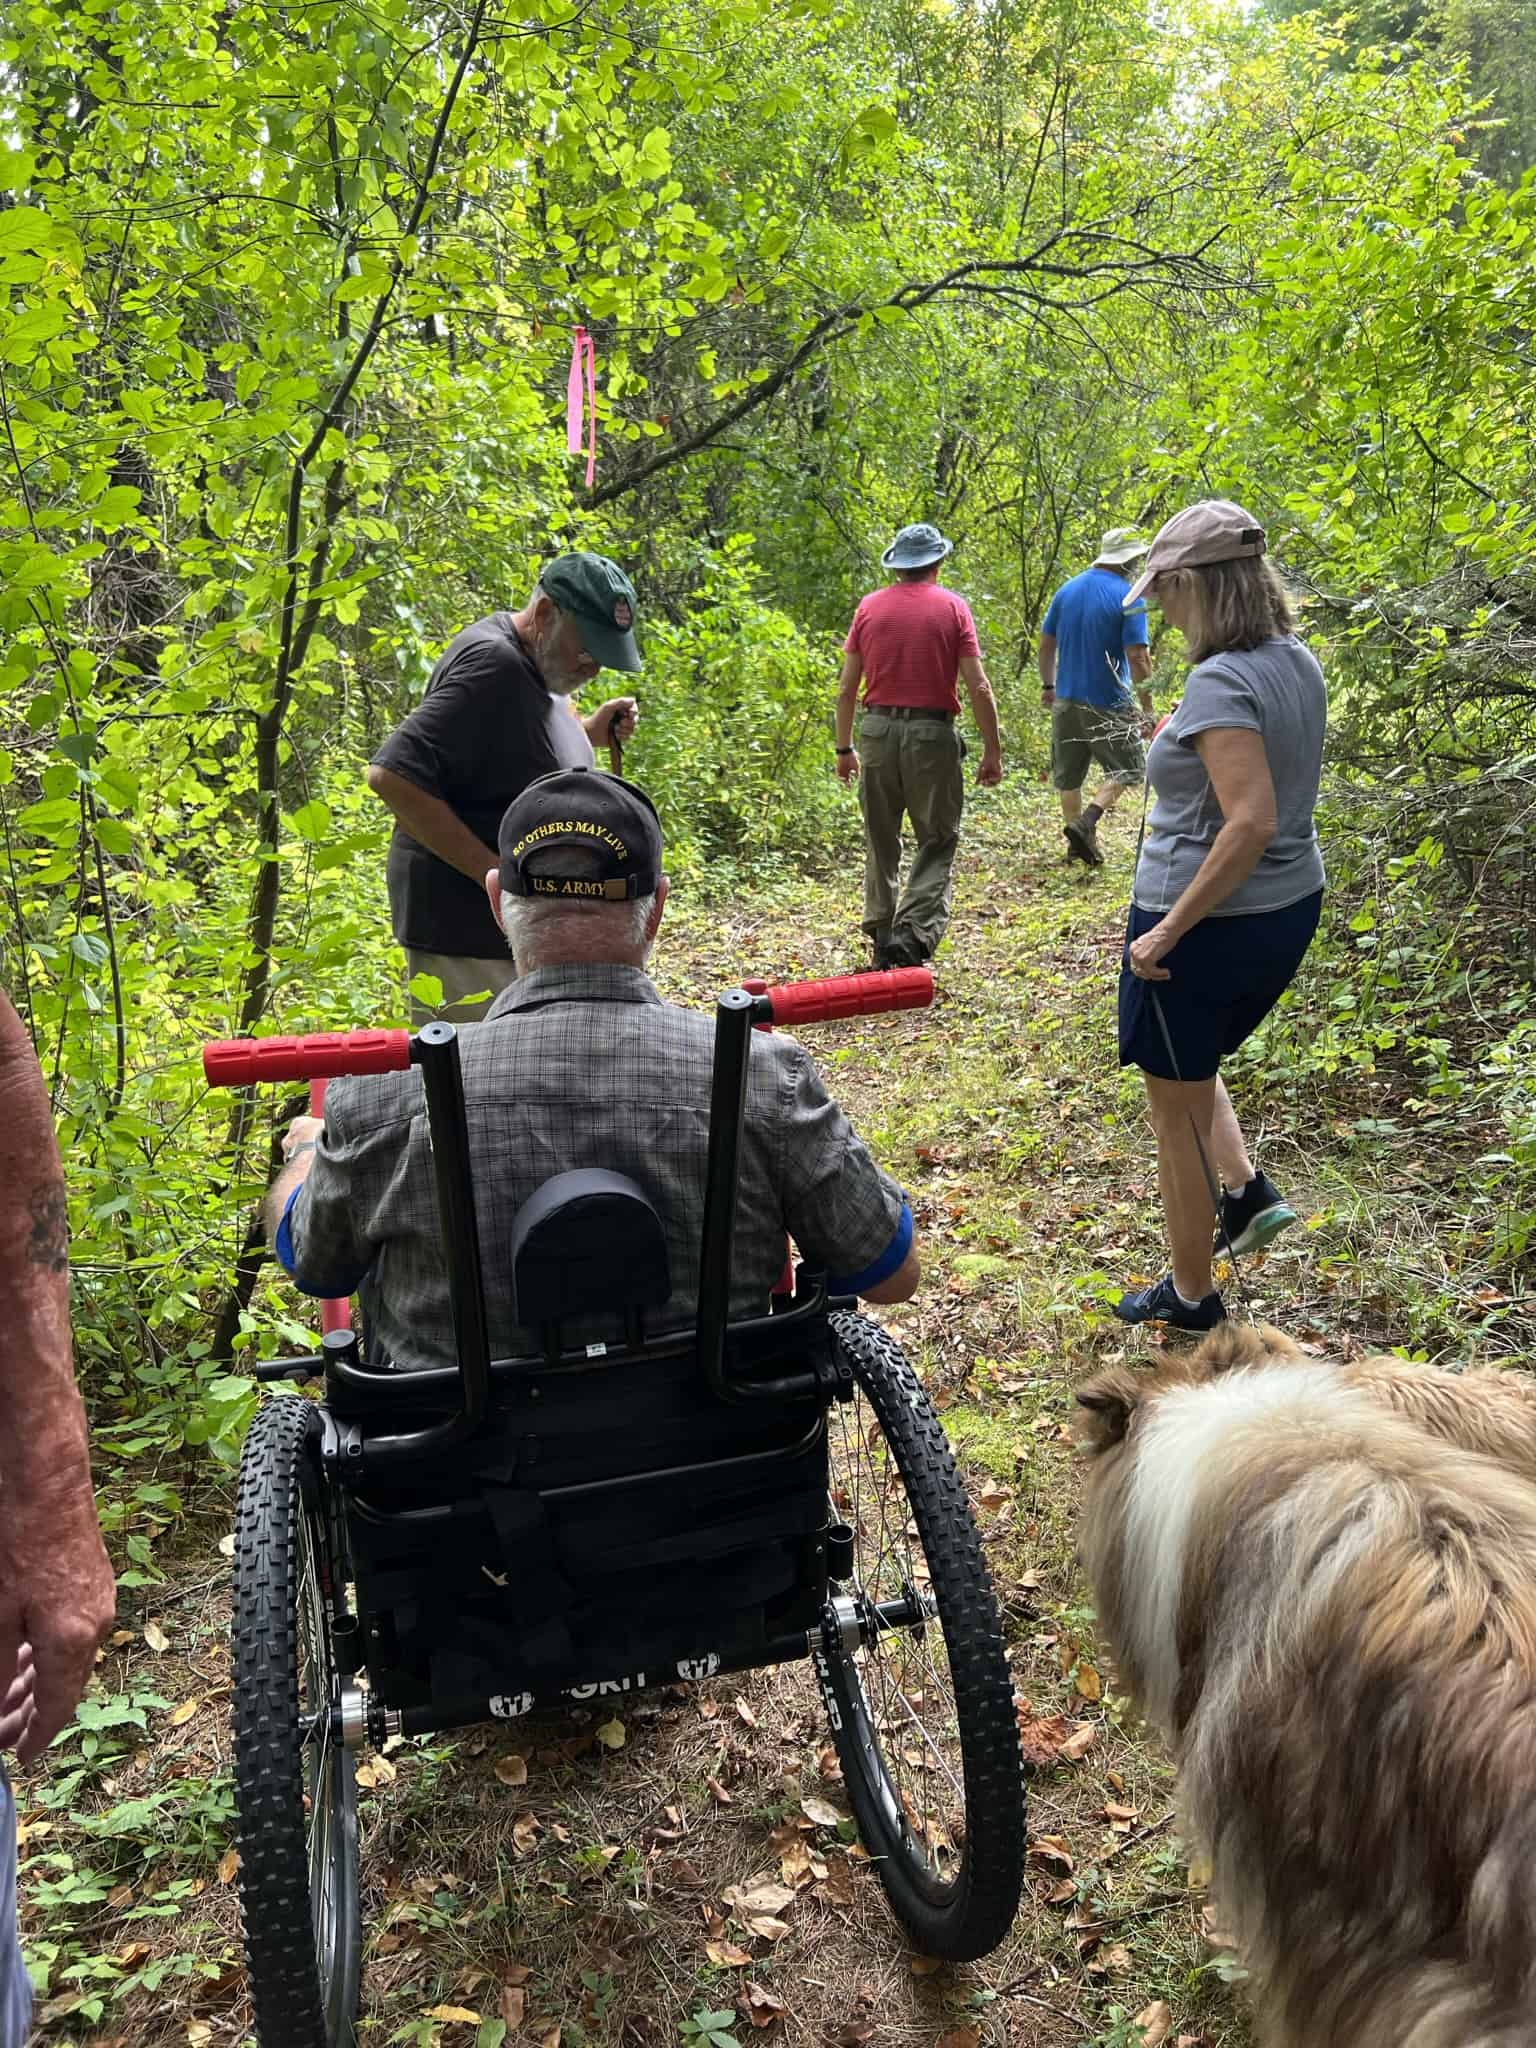 Weekday Walkabout Veterans Hike-Cancelled due to inclement weather